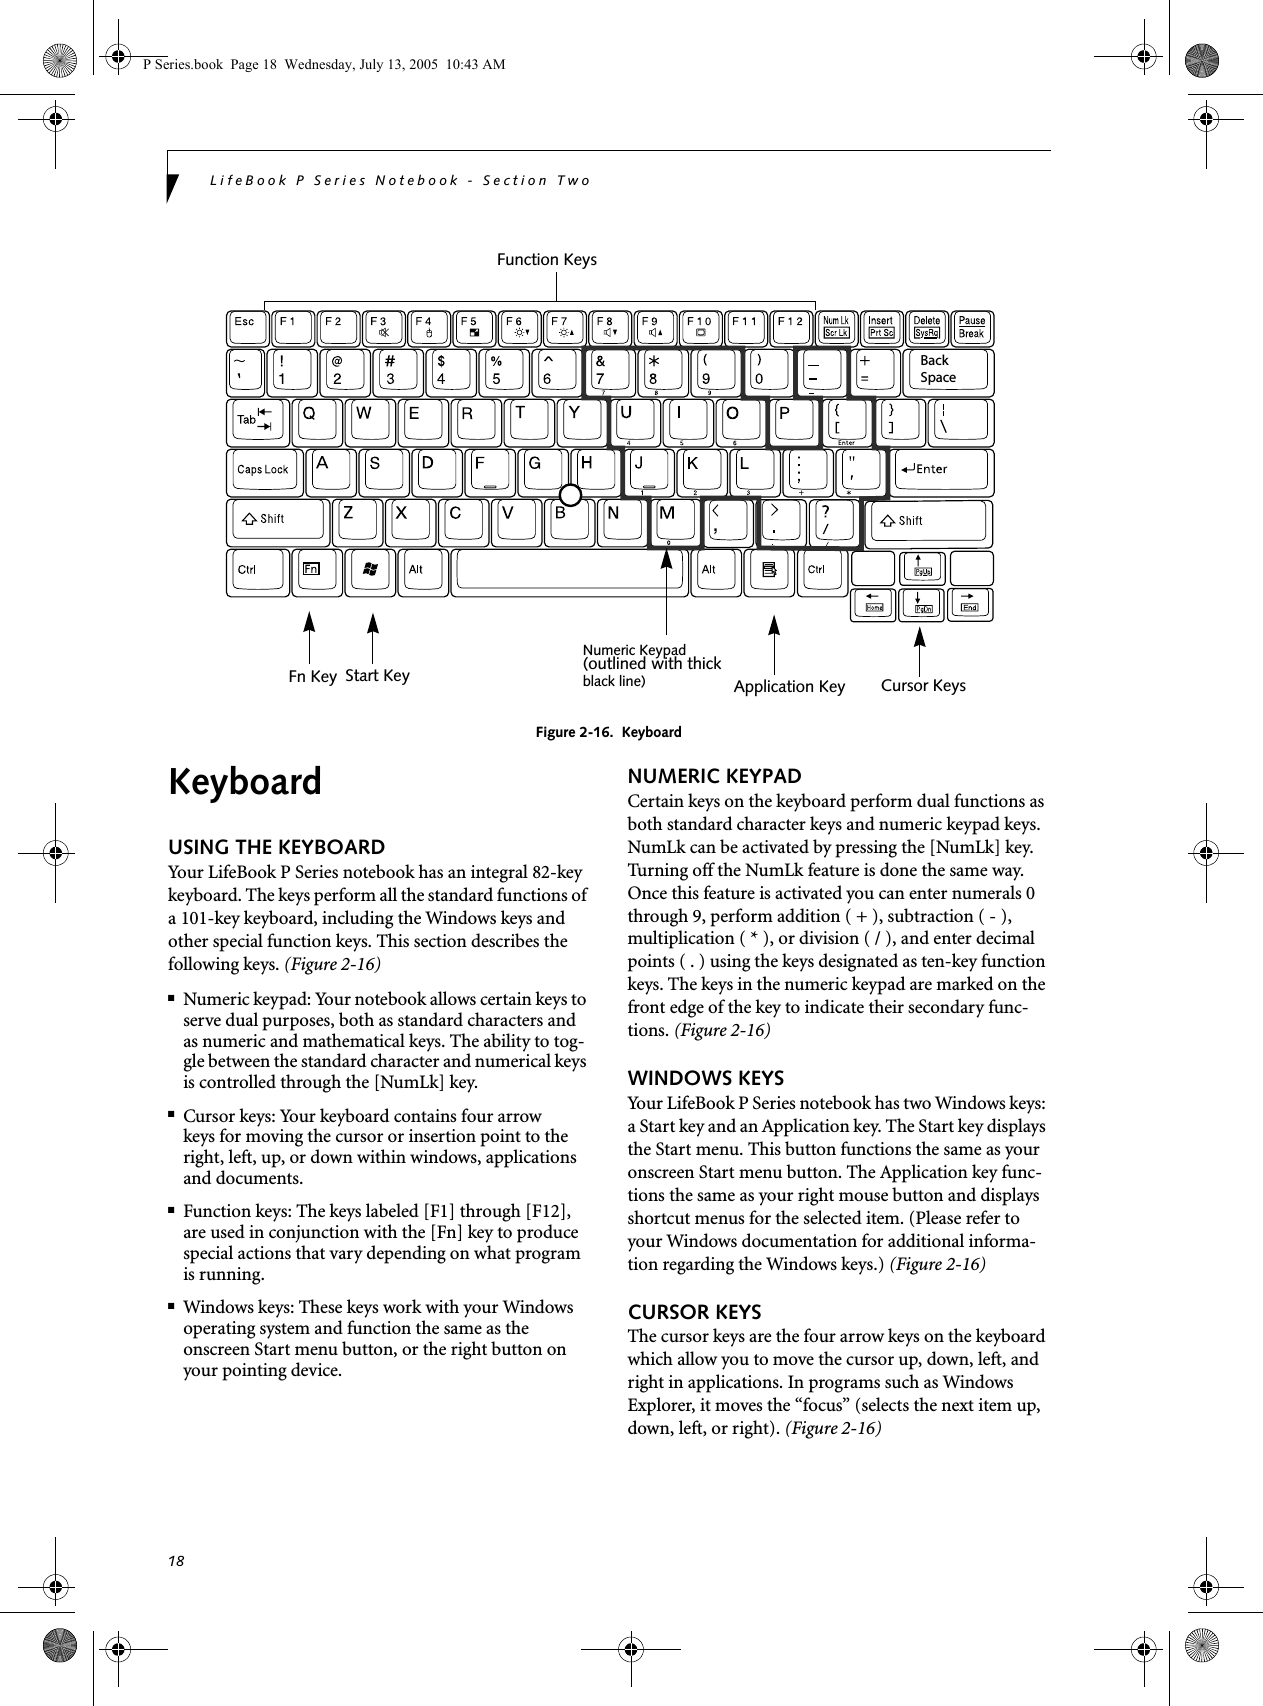 18LifeBook P Series Notebook - Section TwoFigure 2-16.  KeyboardKeyboardUSING THE KEYBOARDYour LifeBook P Series notebook has an integral 82-key keyboard. The keys perform all the standard functions of a 101-key keyboard, including the Windows keys and other special function keys. This section describes the following keys. (Figure 2-16)■Numeric keypad: Your notebook allows certain keys to serve dual purposes, both as standard characters and as numeric and mathematical keys. The ability to tog-gle between the standard character and numerical keys is controlled through the [NumLk] key.■Cursor keys: Your keyboard contains four arrowkeys for moving the cursor or insertion point to the right, left, up, or down within windows, applications and documents. ■Function keys: The keys labeled [F1] through [F12], are used in conjunction with the [Fn] key to produce special actions that vary depending on what program is running. ■Windows keys: These keys work with your Windows operating system and function the same as the onscreen Start menu button, or the right button on your pointing device.NUMERIC KEYPADCertain keys on the keyboard perform dual functions as both standard character keys and numeric keypad keys. NumLk can be activated by pressing the [NumLk] key. Turning off the NumLk feature is done the same way. Once this feature is activated you can enter numerals 0 through 9, perform addition ( + ), subtraction ( - ),multiplication ( * ), or division ( / ), and enter decimal points ( . ) using the keys designated as ten-key function keys. The keys in the numeric keypad are marked on the front edge of the key to indicate their secondary func-tions. (Figure 2-16) WINDOWS KEYSYour LifeBook P Series notebook has two Windows keys: a Start key and an Application key. The Start key displays the Start menu. This button functions the same as your onscreen Start menu button. The Application key func-tions the same as your right mouse button and displays shortcut menus for the selected item. (Please refer to your Windows documentation for additional informa-tion regarding the Windows keys.) (Figure 2-16)CURSOR KEYSThe cursor keys are the four arrow keys on the keyboard which allow you to move the cursor up, down, left, and right in applications. In programs such as Windows Explorer, it moves the “focus” (selects the next item up, down, left, or right). (Figure 2-16)Back SpaceFn Key Start KeyFunction KeysNumeric KeypadApplication Key Cursor Keys(outlined with thickblack line) P Series.book  Page 18  Wednesday, July 13, 2005  10:43 AM